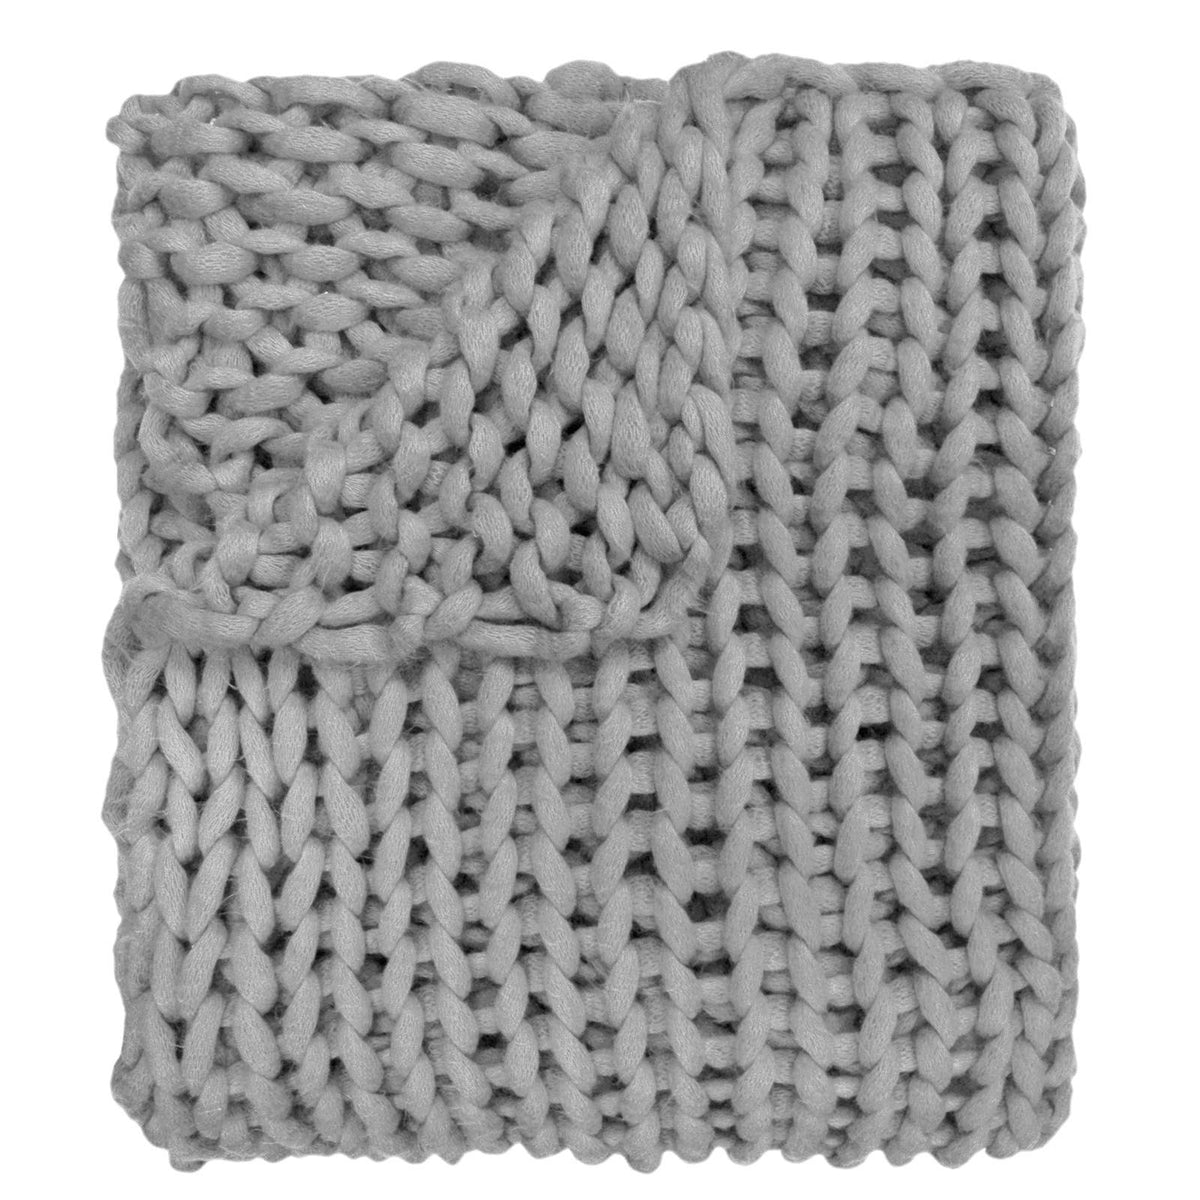 Blanket - Chunky Knit Throw 3 Colors